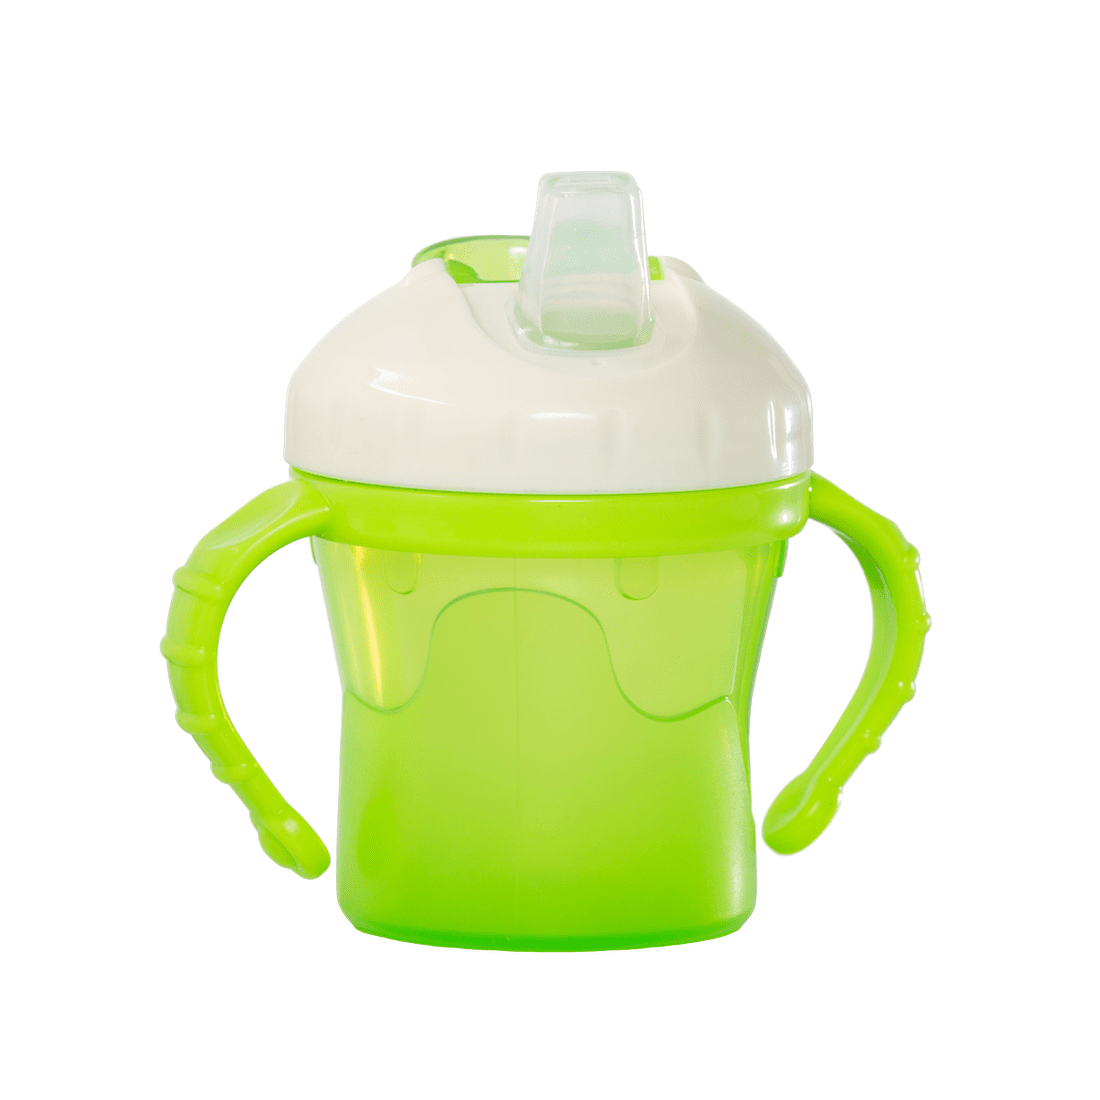 The One Cup with spout and handles. Green.